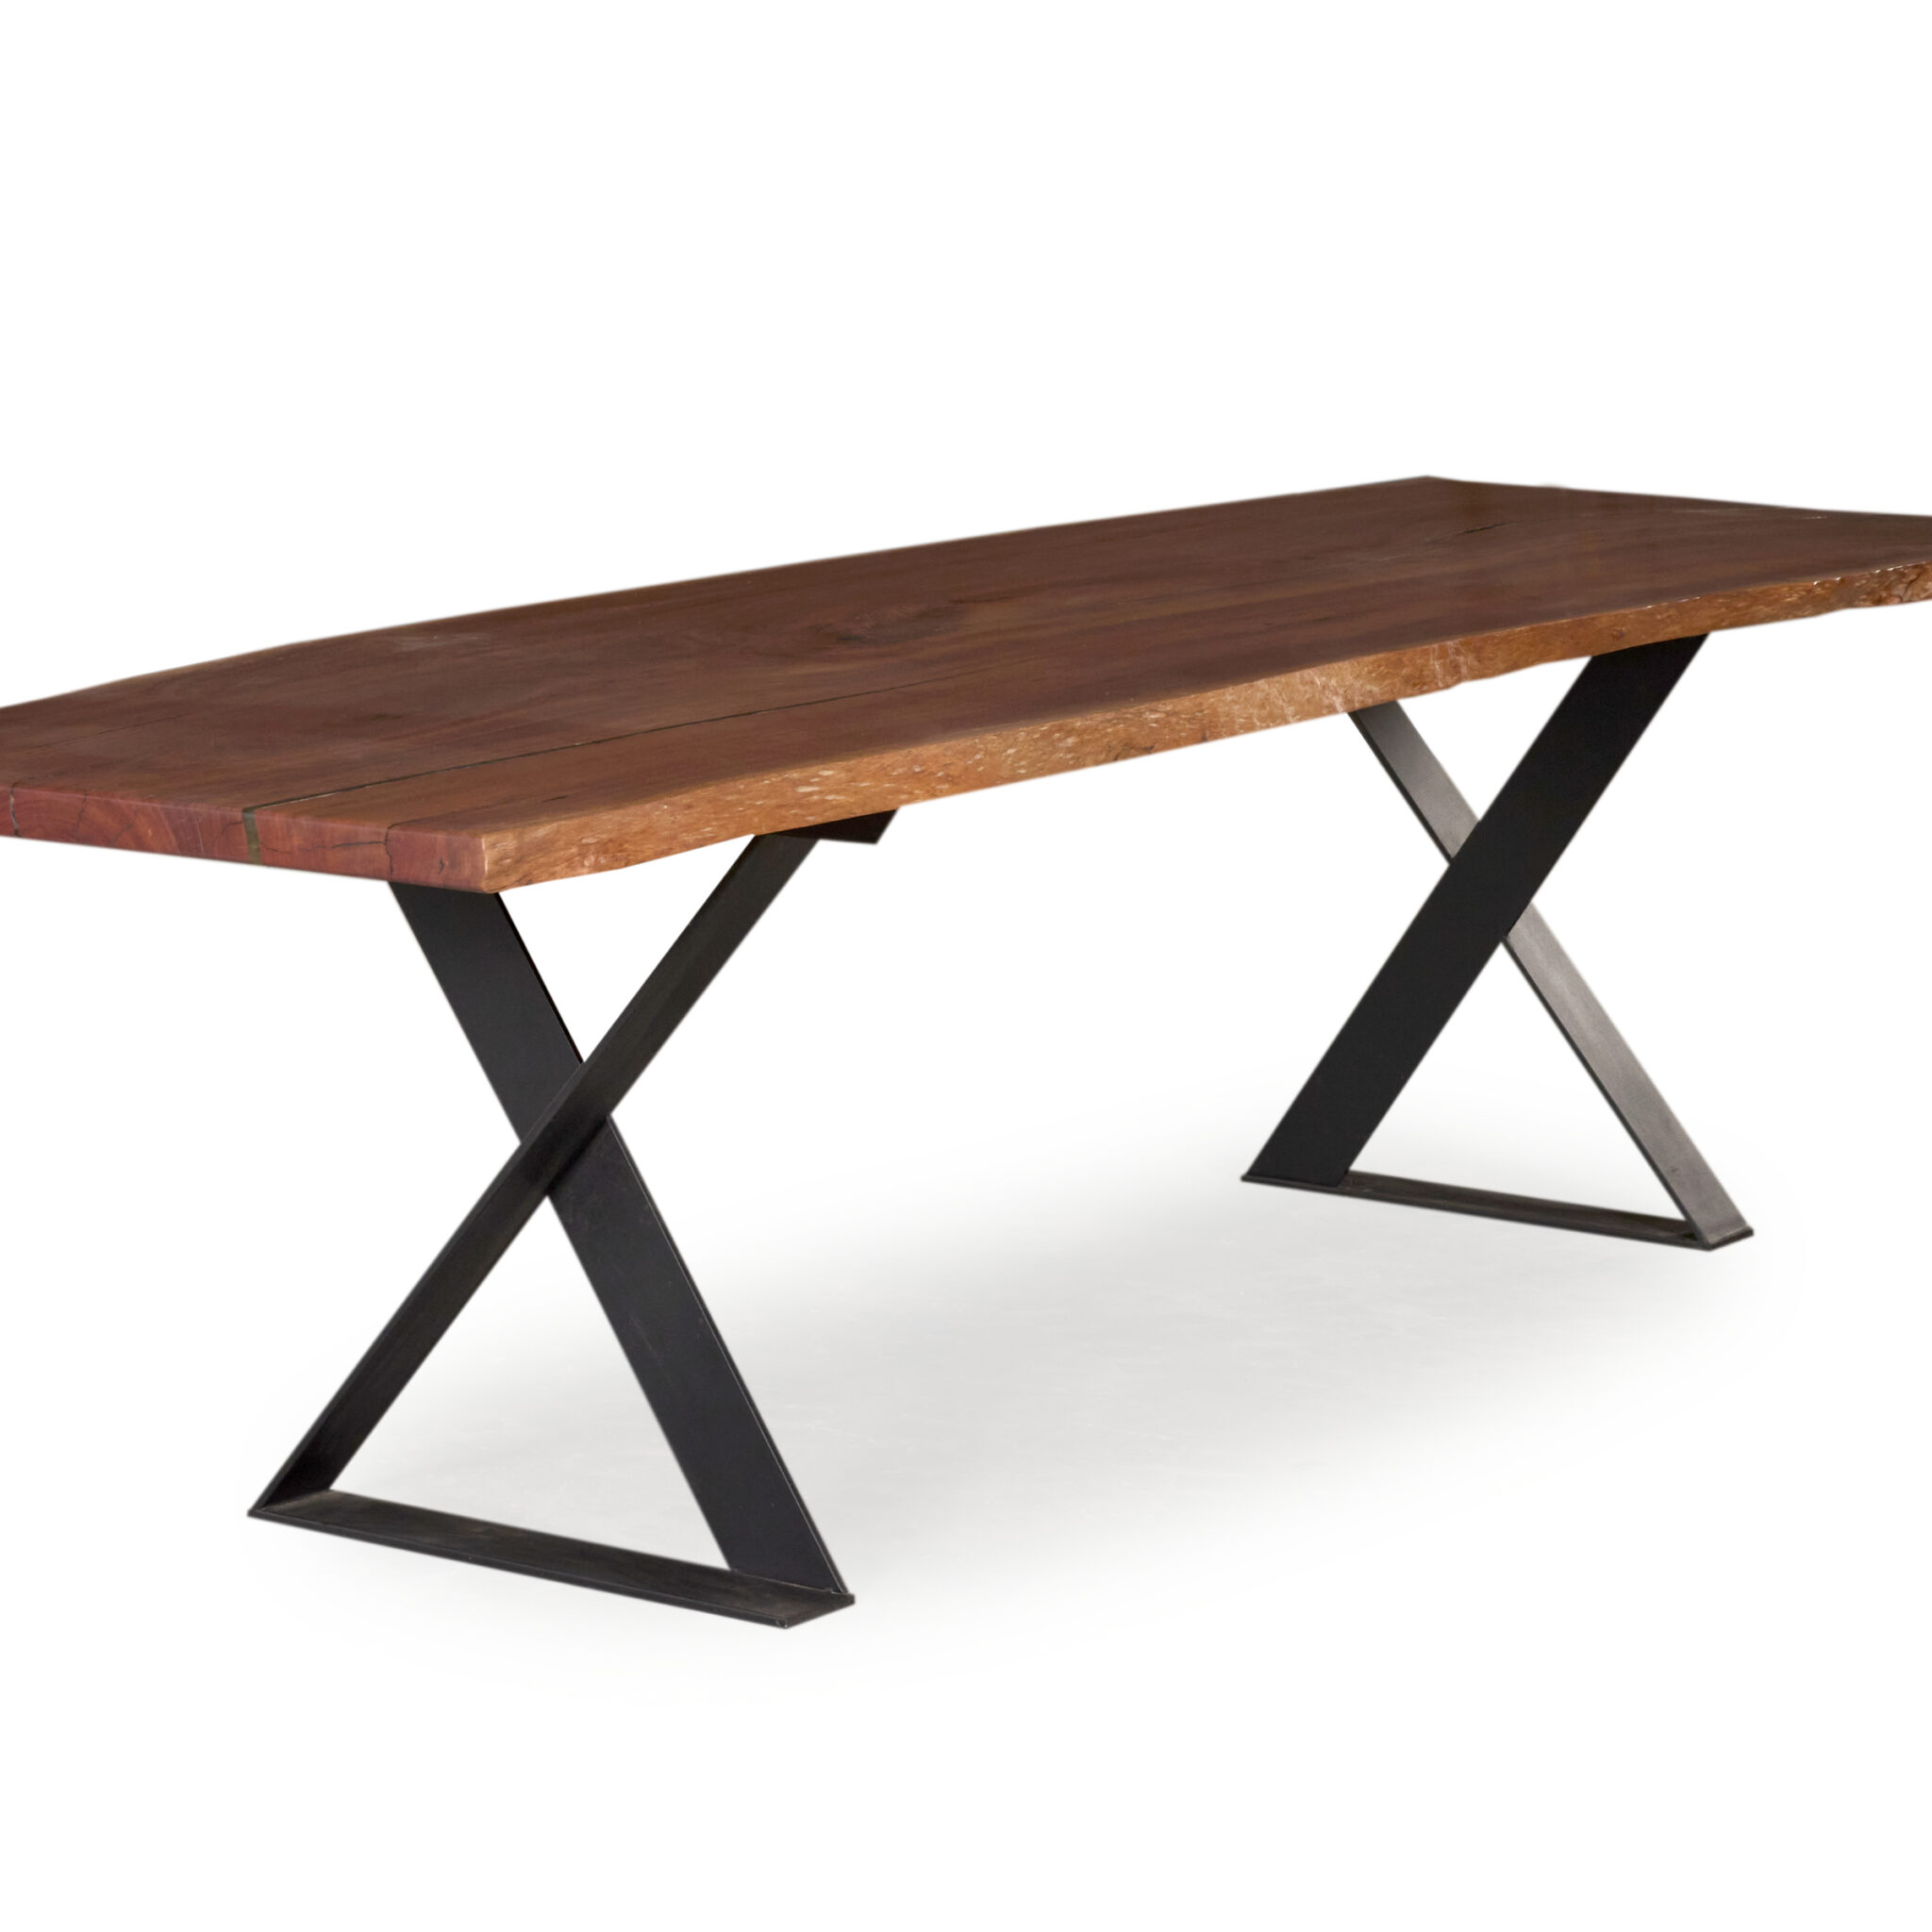 Porte Dining Table: Redgum timber with sleek X leg steel black base and natural edge.